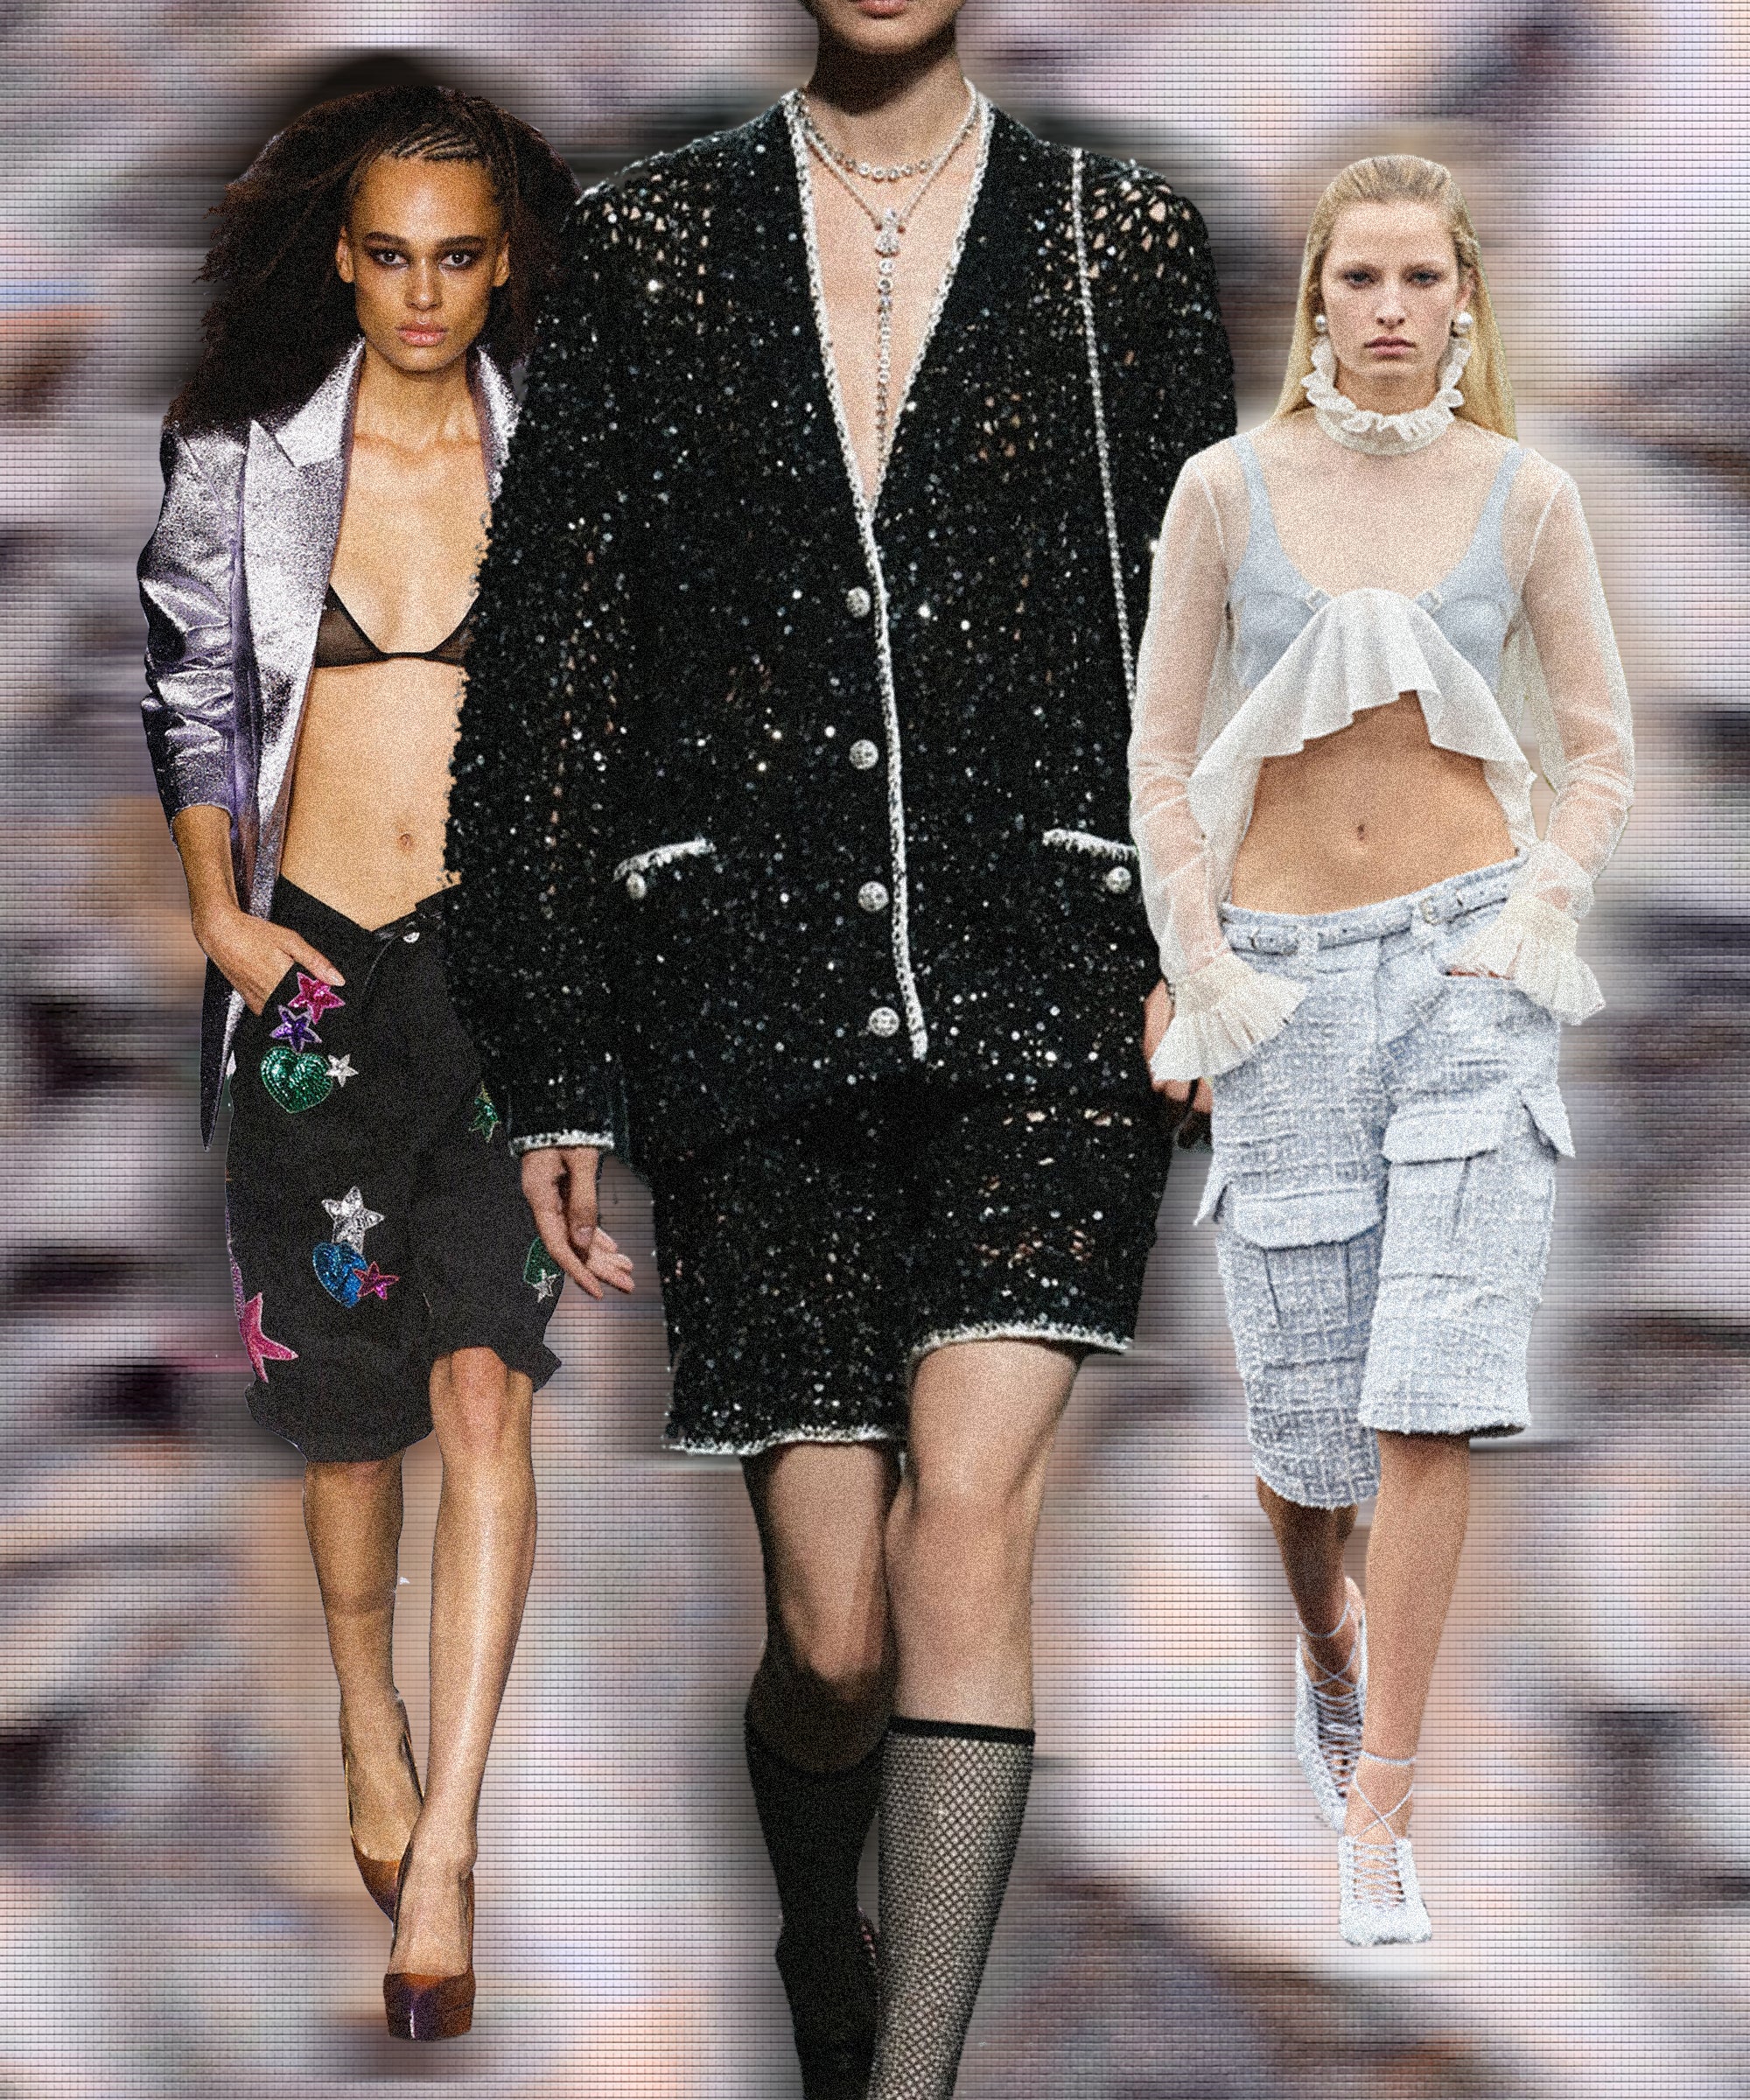 Fashion trends for Spring-Summer 2023: The ultimate guide